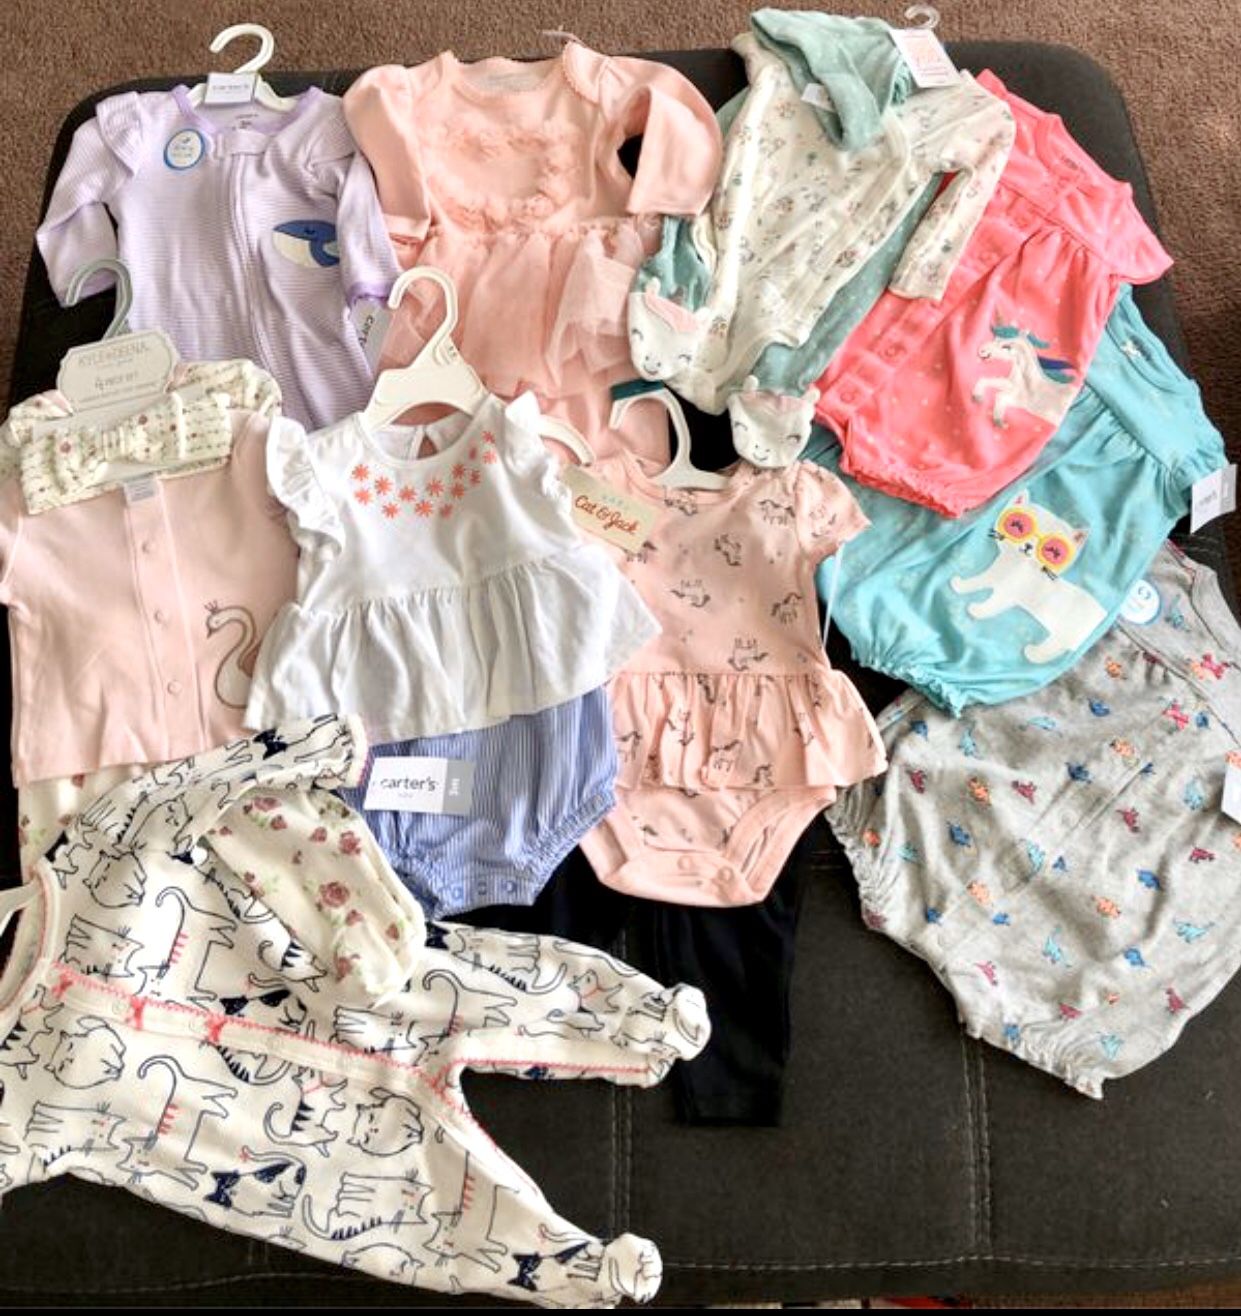 3 month old baby clothing